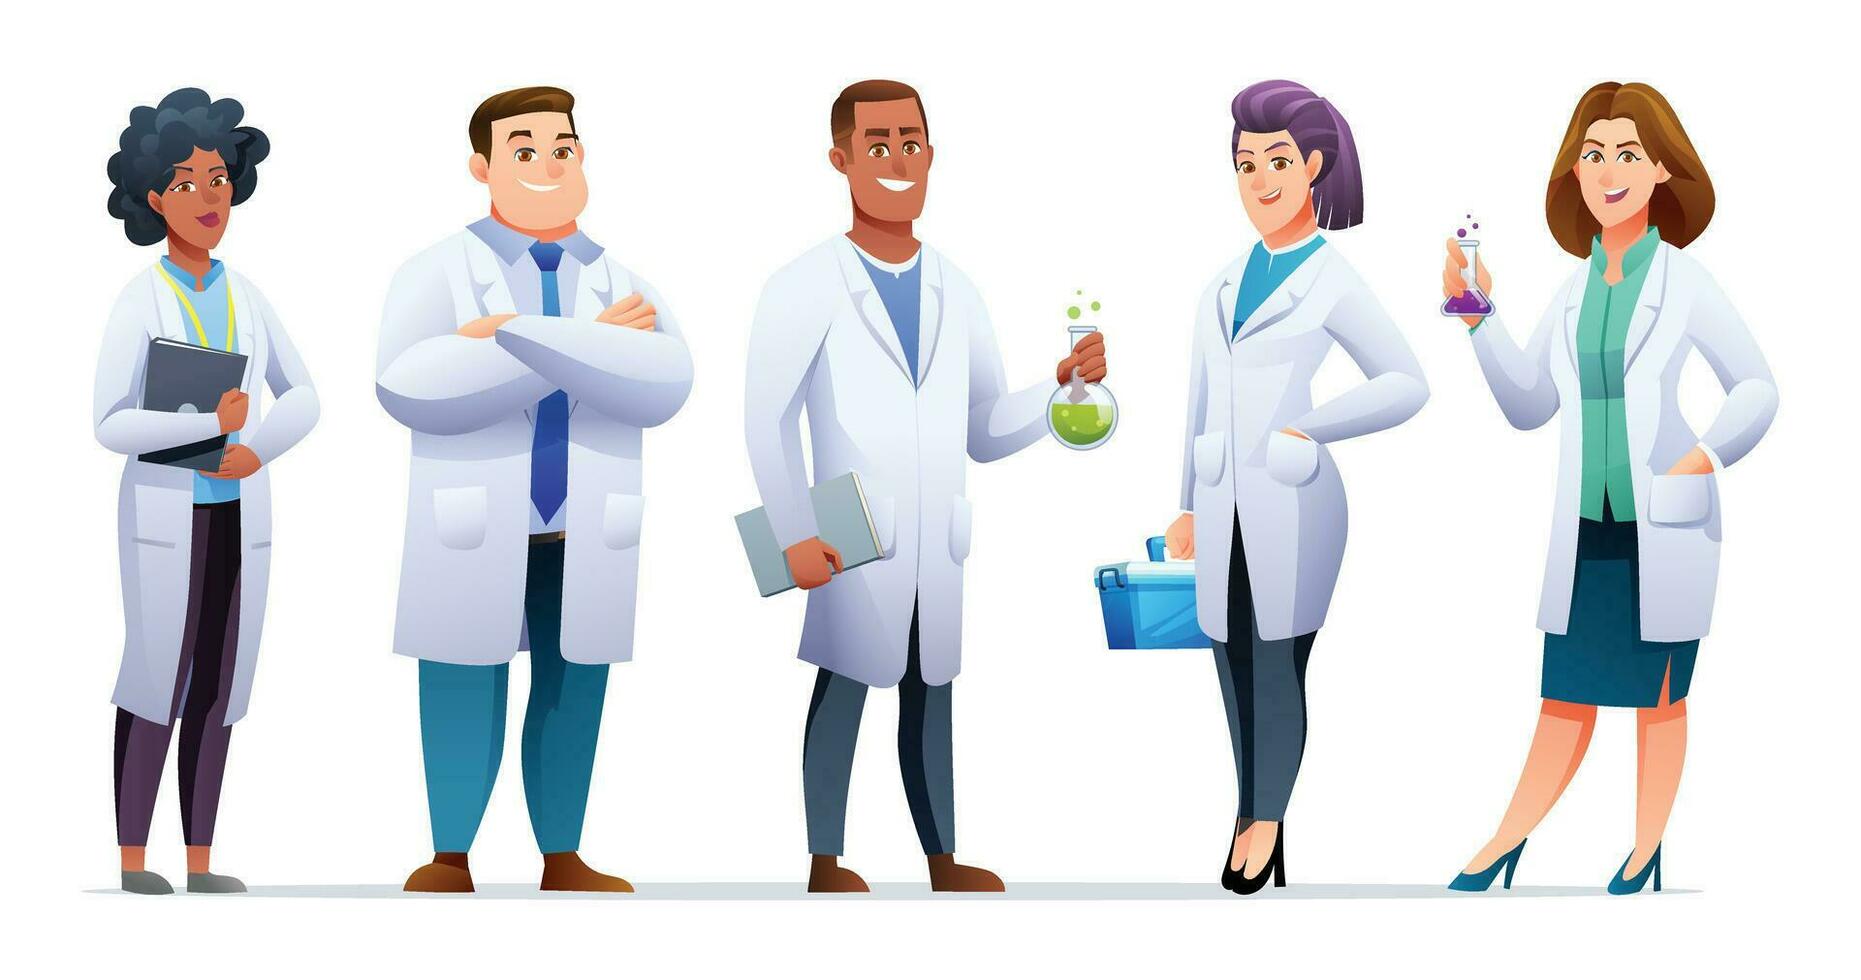 Set of man and woman scientist characters in cartoon style vector